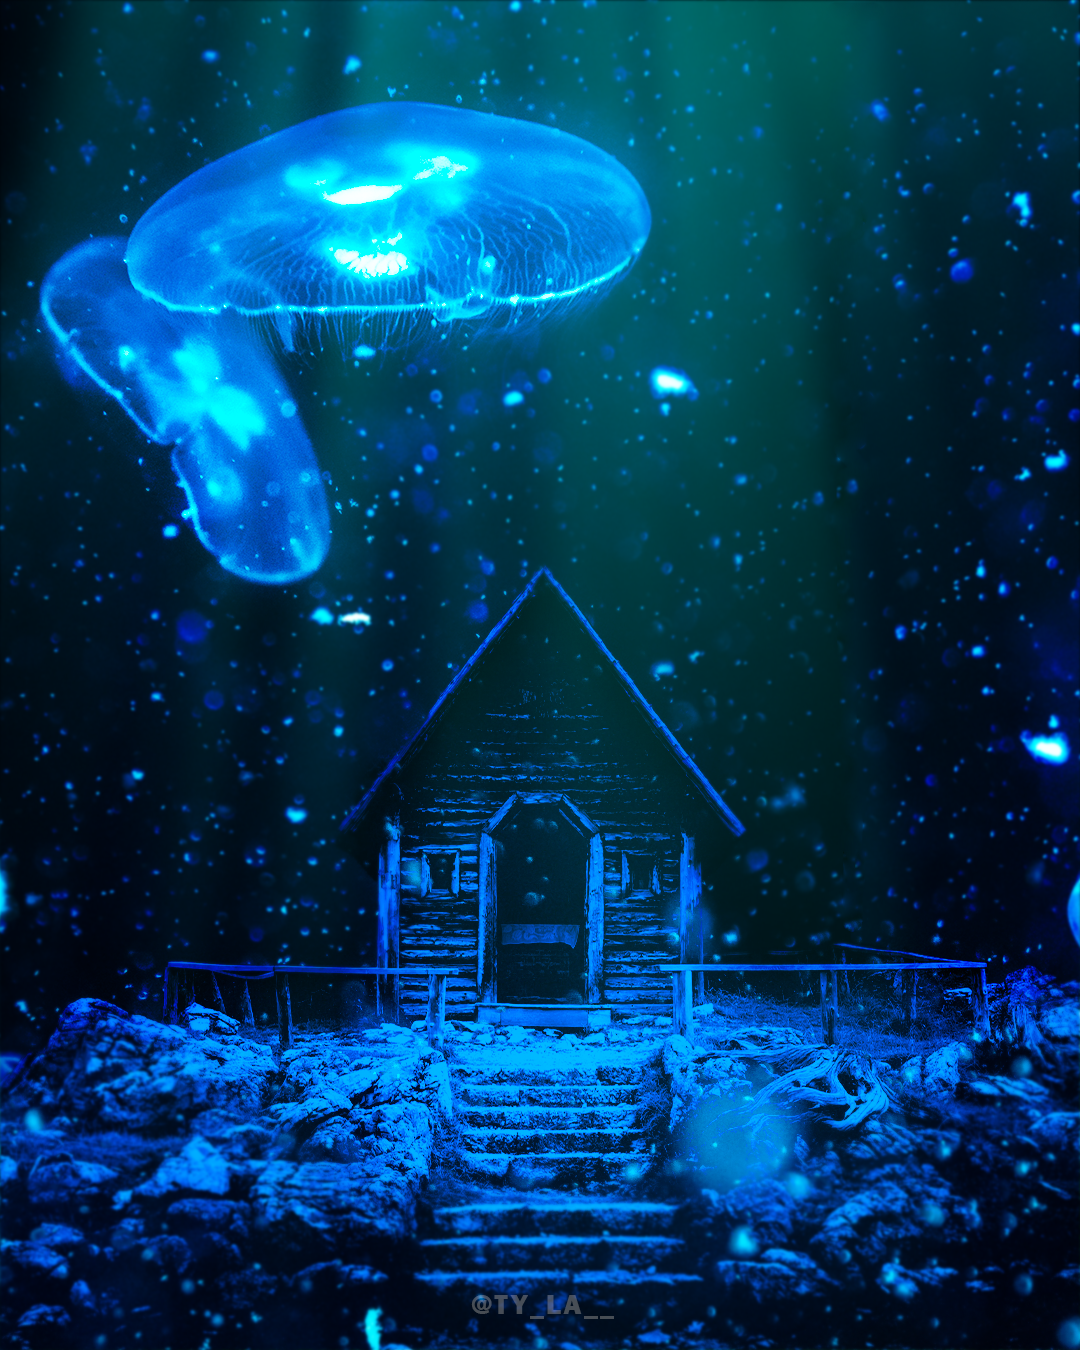 The house in the ocean - Photoshop Art by TylaArt on DeviantArt